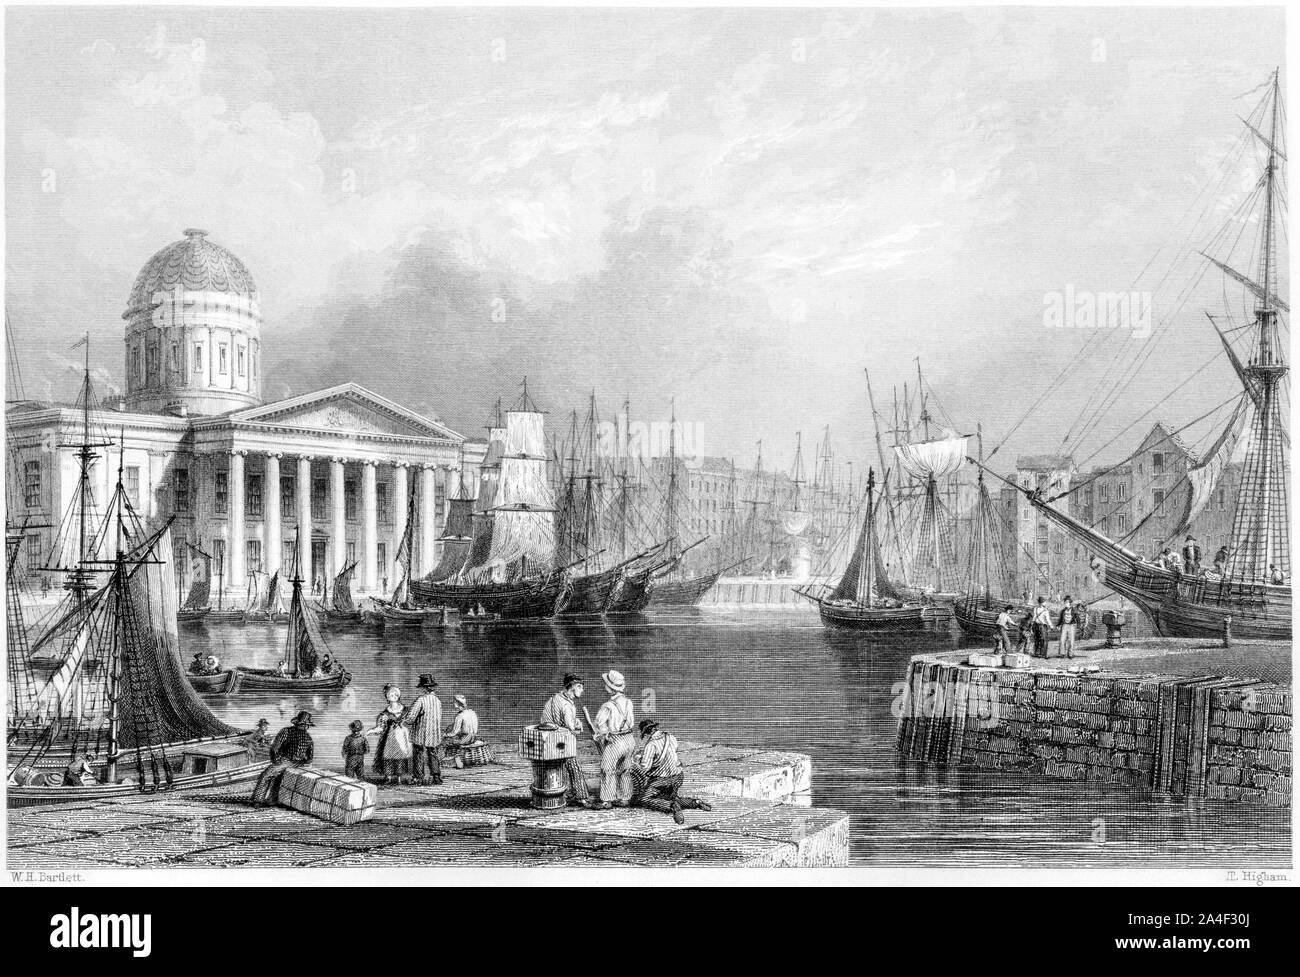 An engraving of Canning Dock and Custom House, Liverpool UK scanned at high resolution from a book printed in 1842. Believed copyright free. Stock Photo